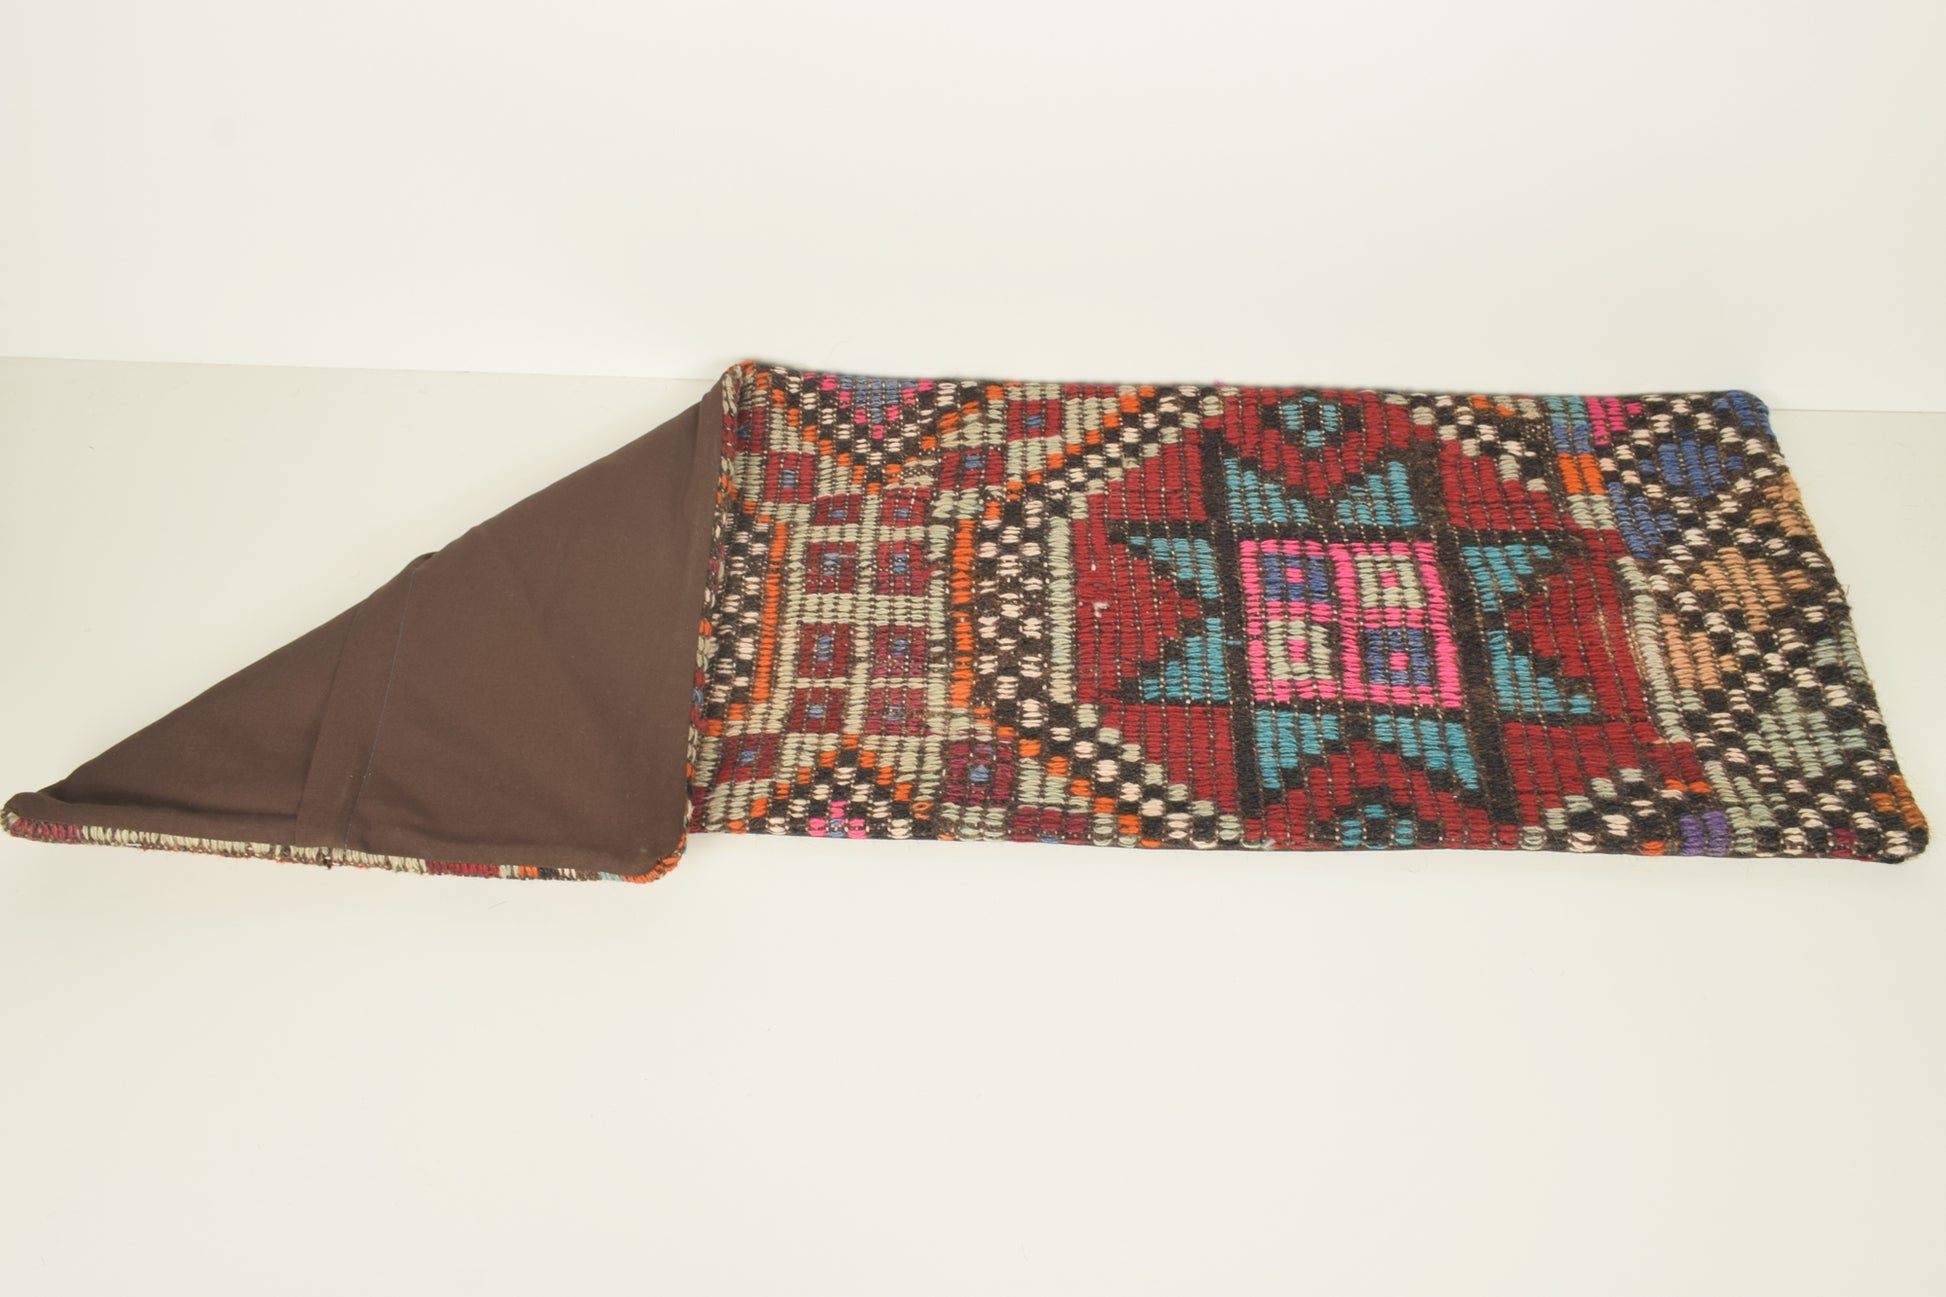 Kilim Rugs and Carpets Pillow I00221 Lumbar Adornment Low-priced